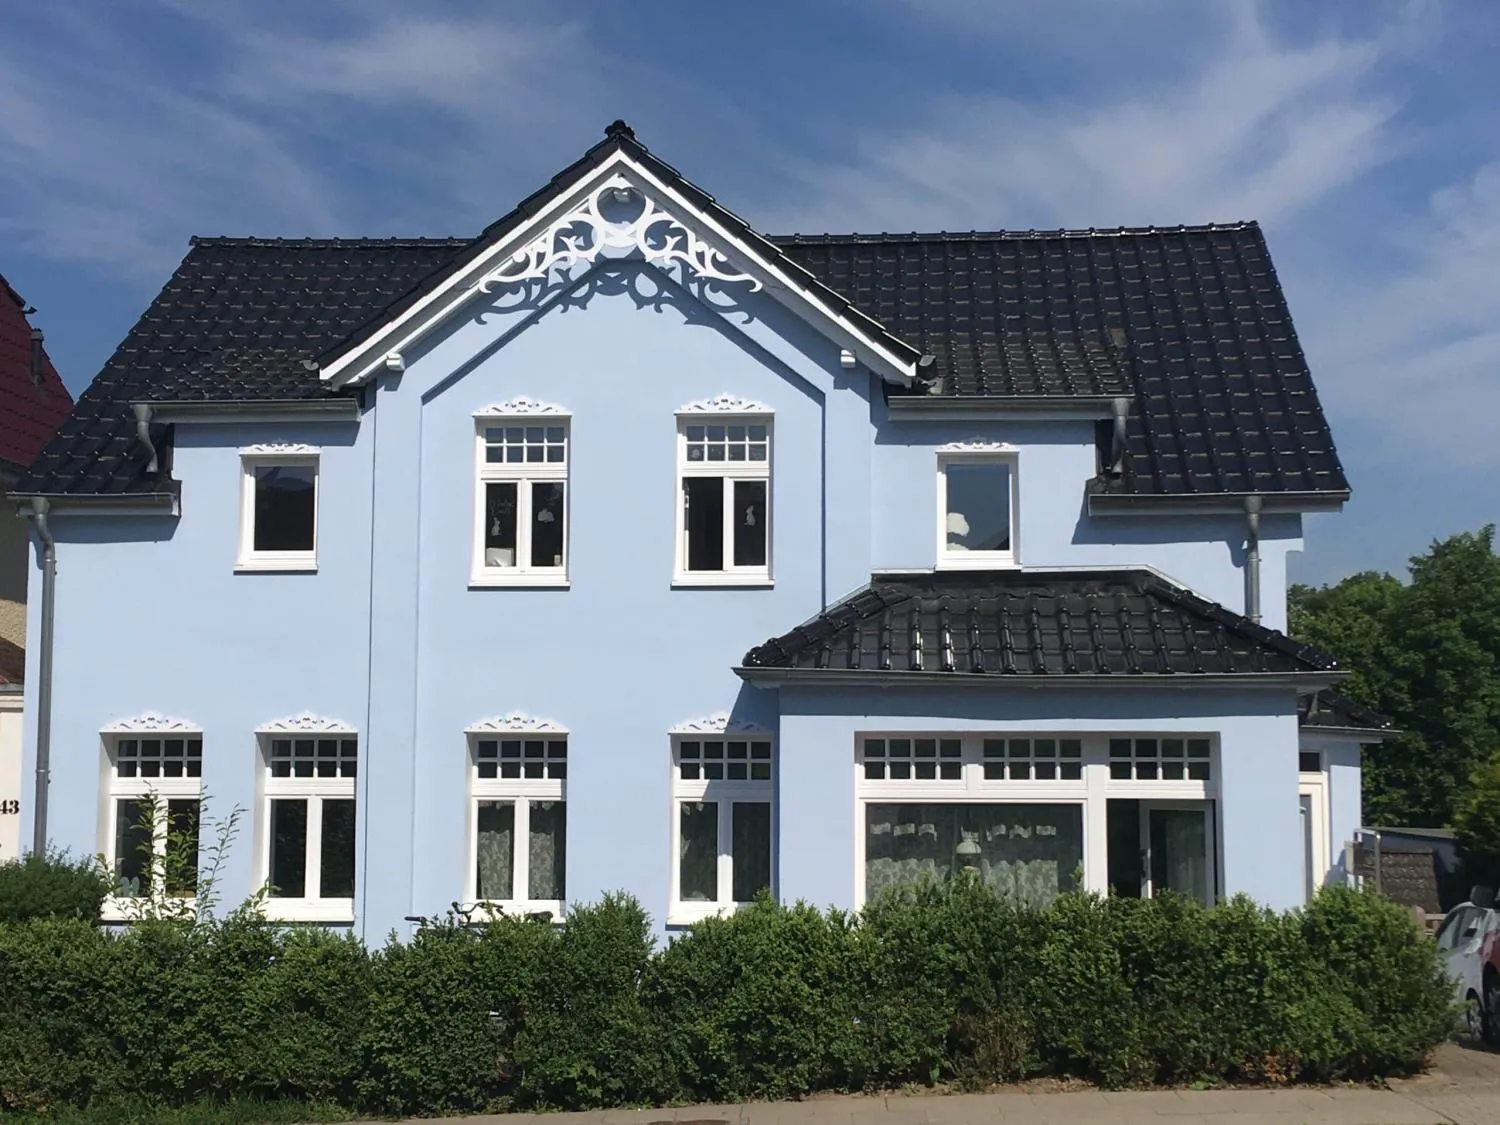 Gable pendant 002 - A blue house with victorian decoration for gables, eaves & bargeboards from Swedish Gaveldekor